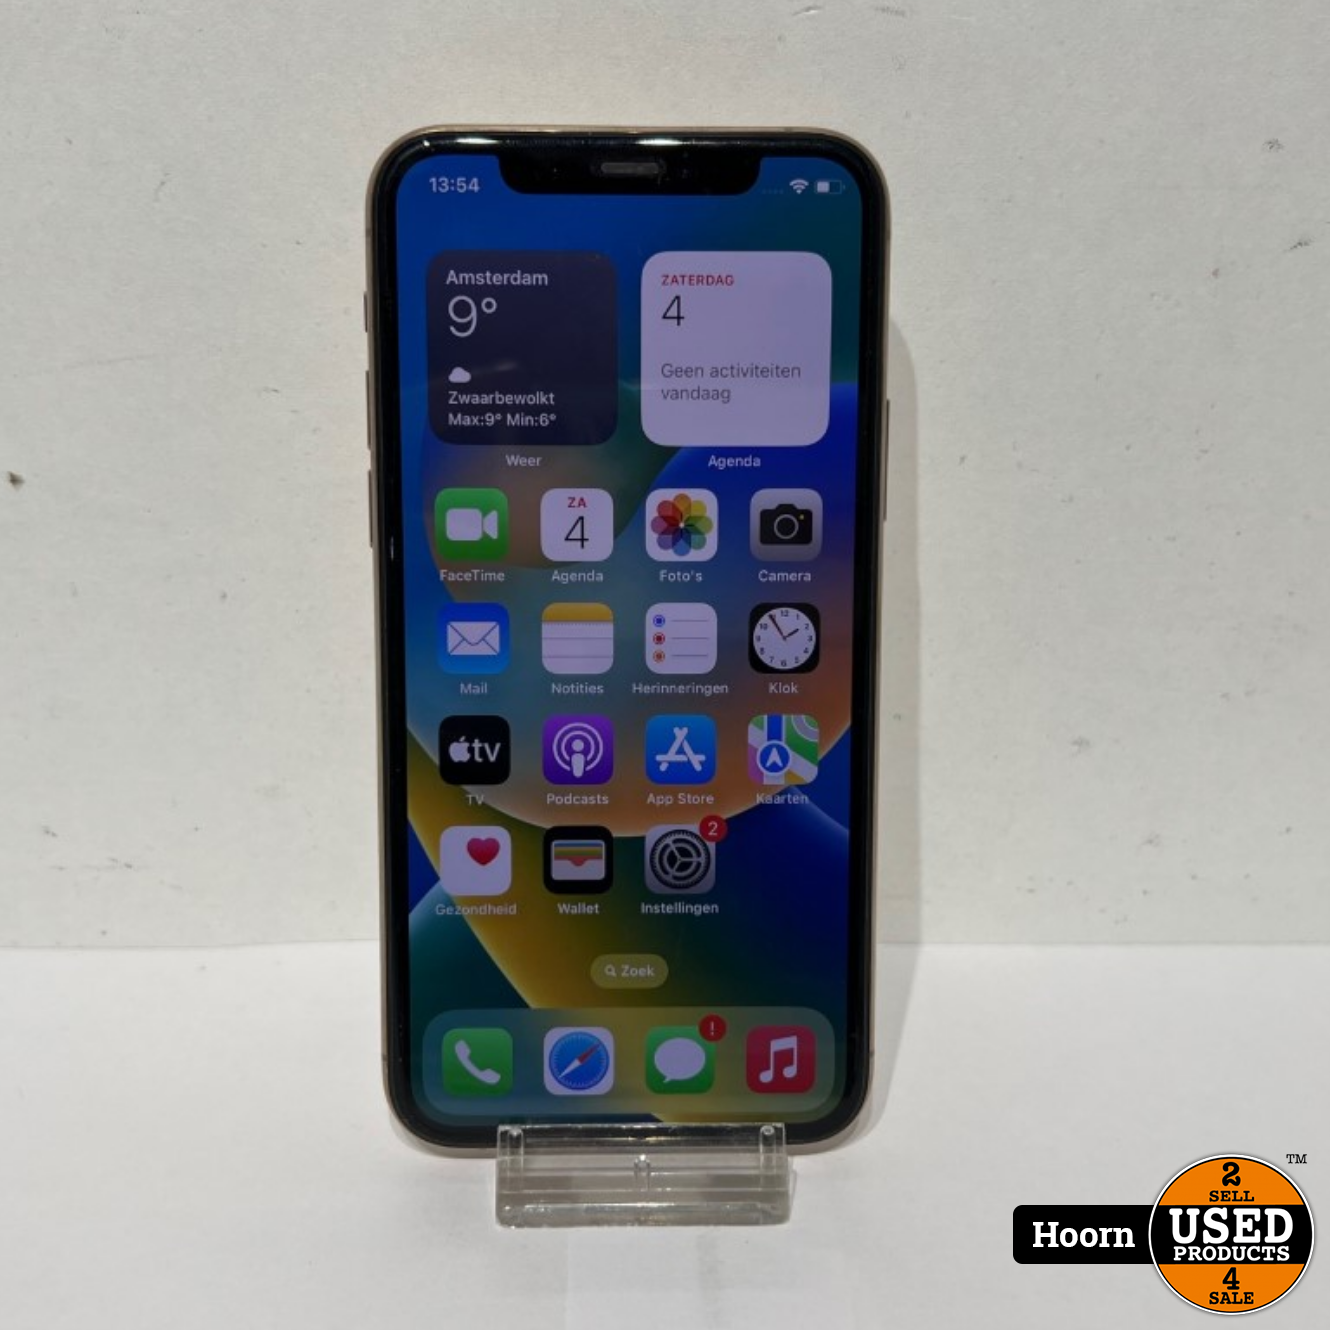 Apple iPhone iPhone 11 Pro Gold Los Accu: 85% - Used Products